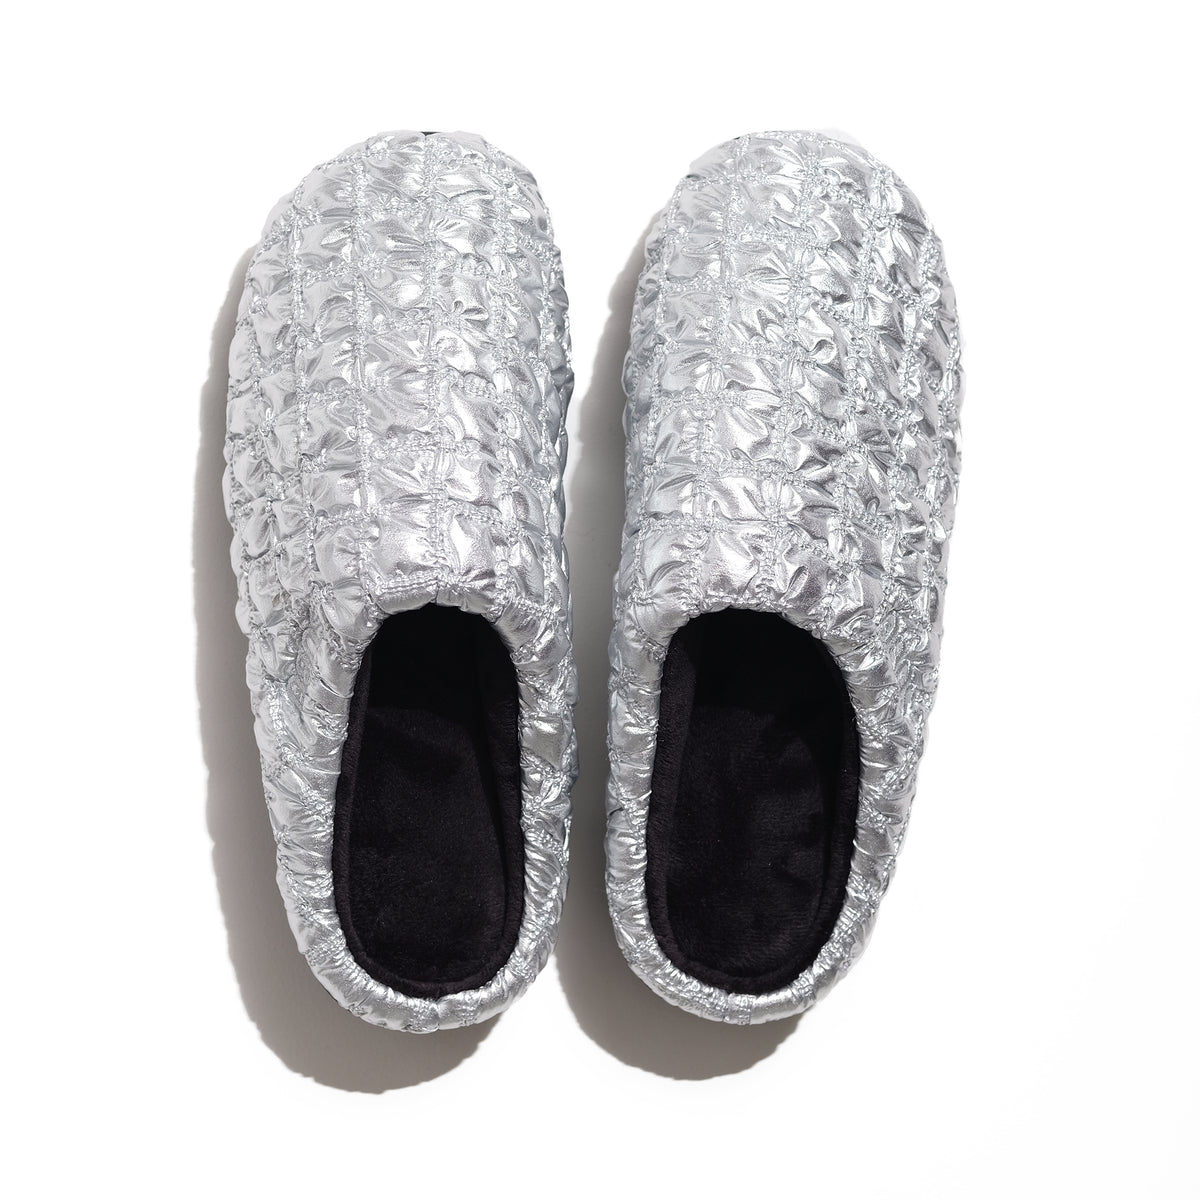 Fall & Winter Concept Slippers - Bumpy Silver